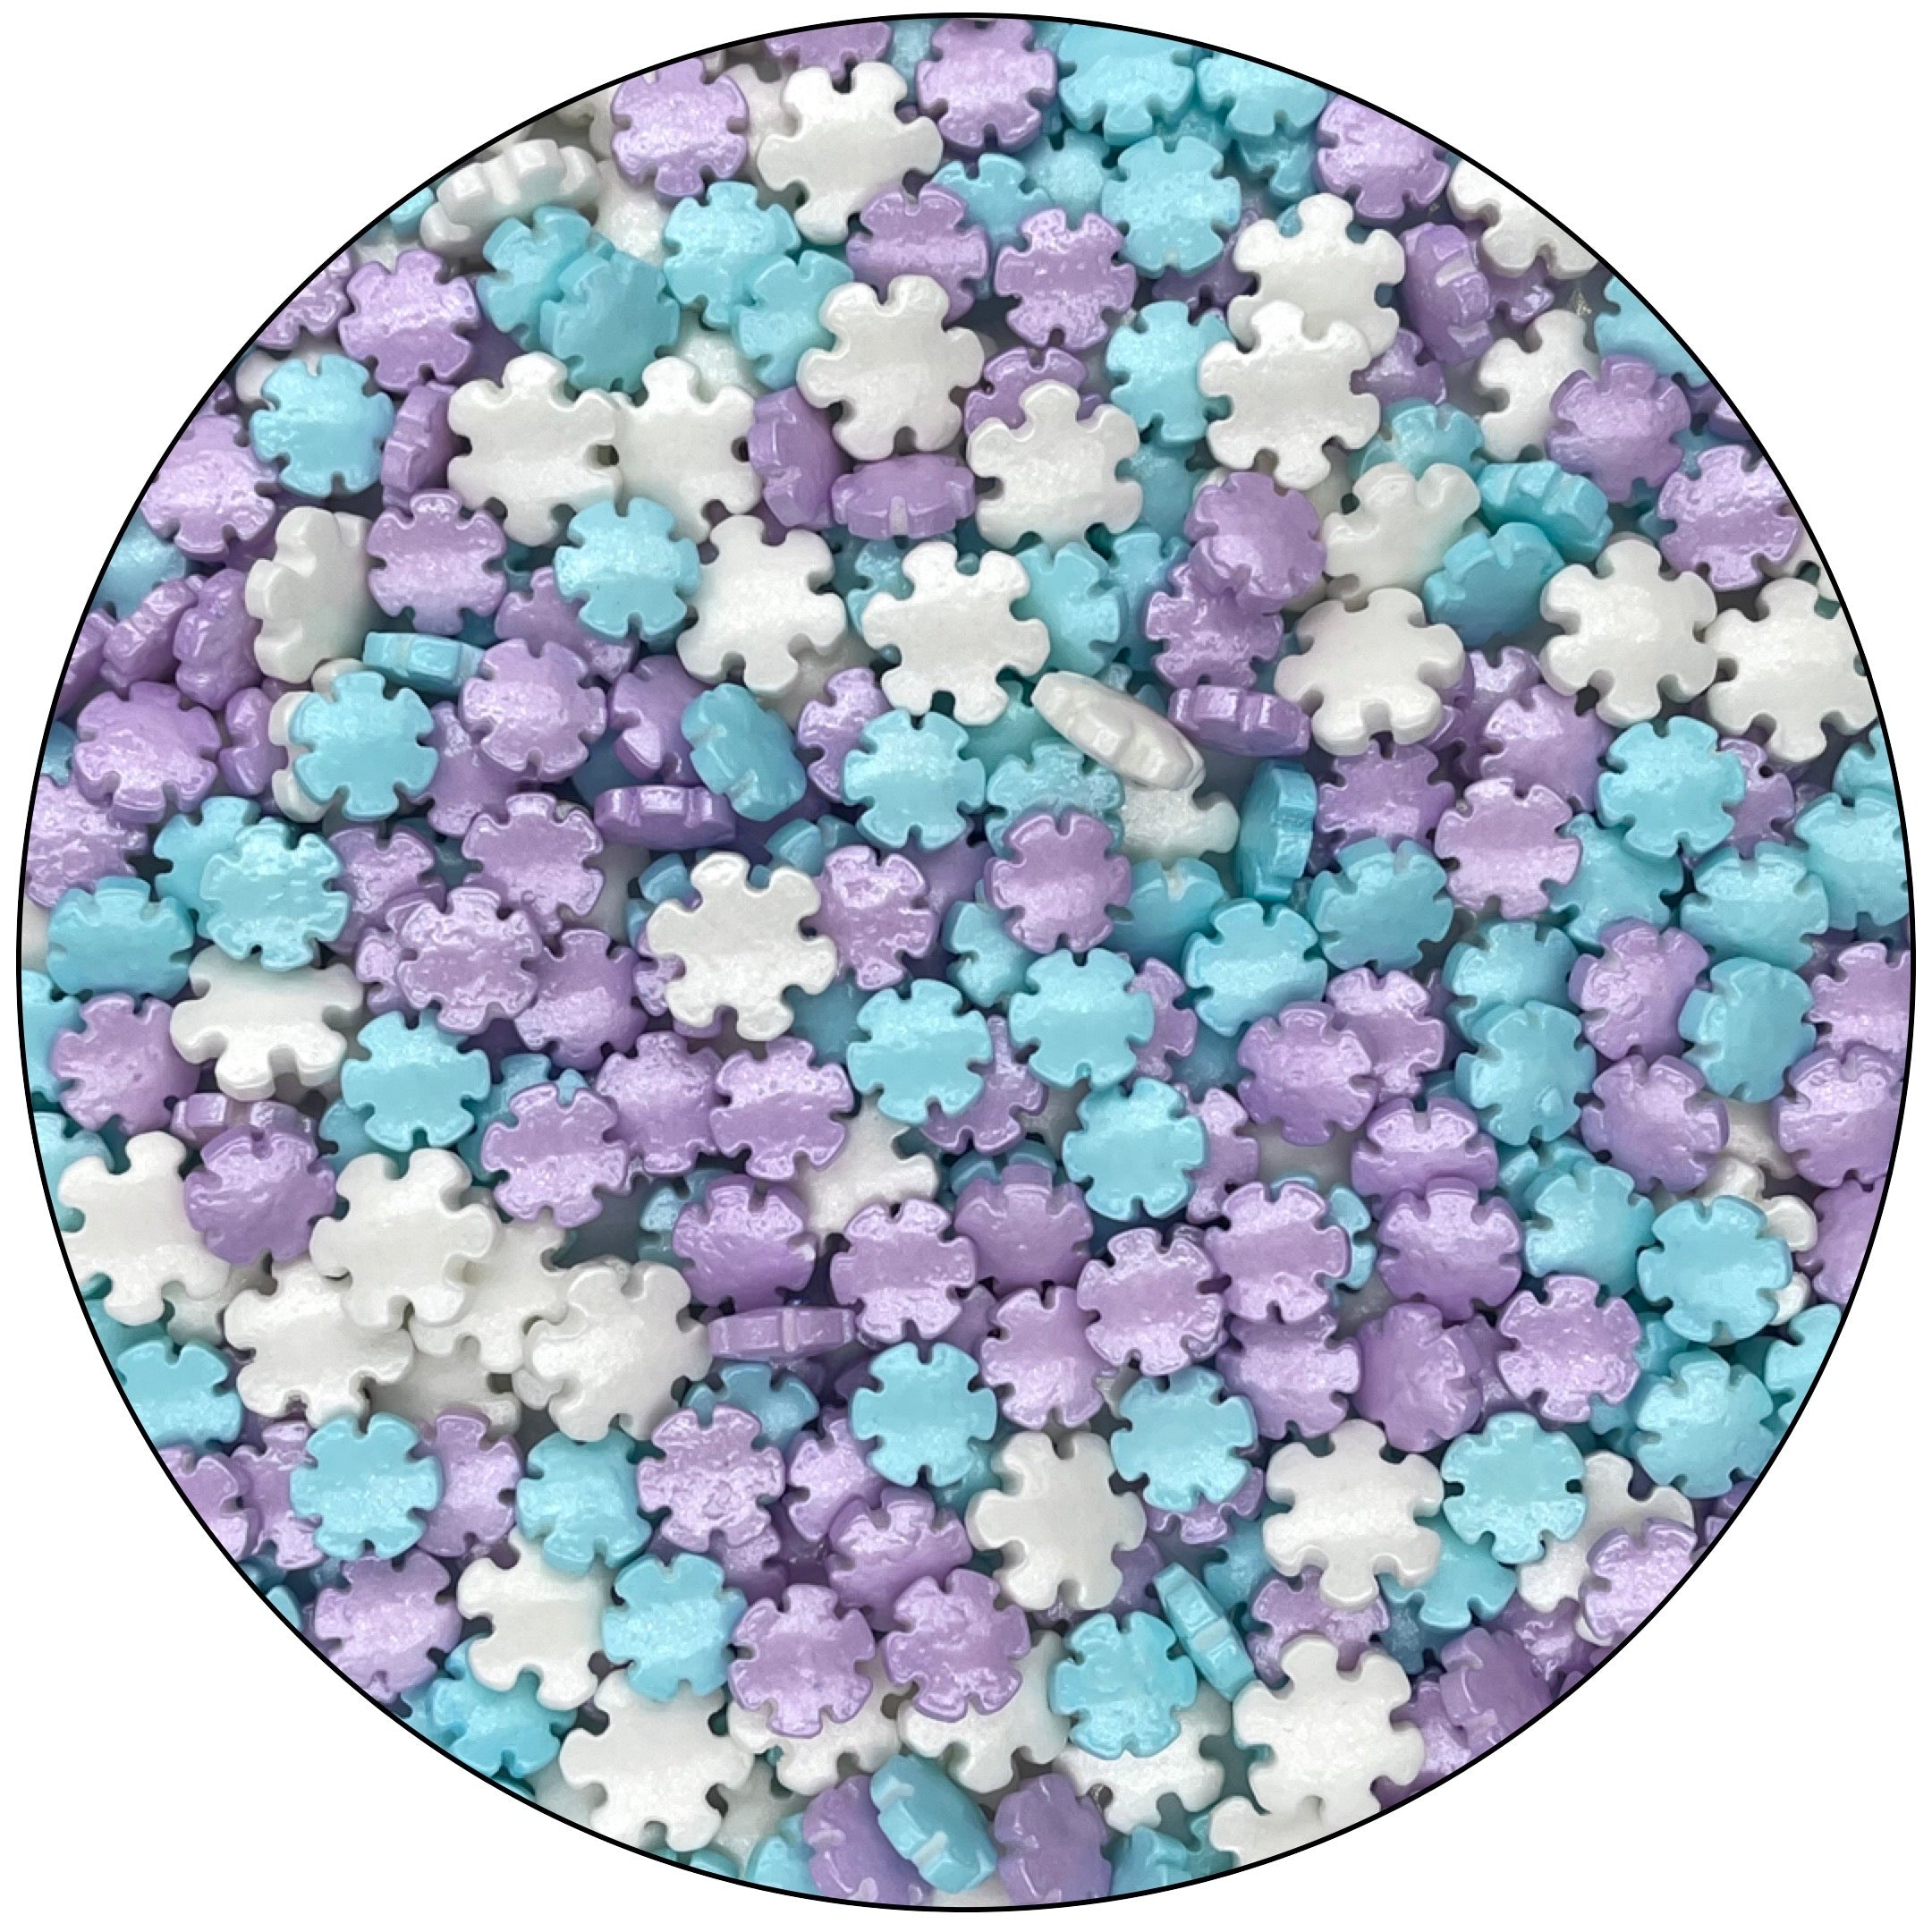 Snowflake shaped candy sprinkles, blue and purple snowflake sprinkles, cake decorations, cookie topping, dessert sprinkles